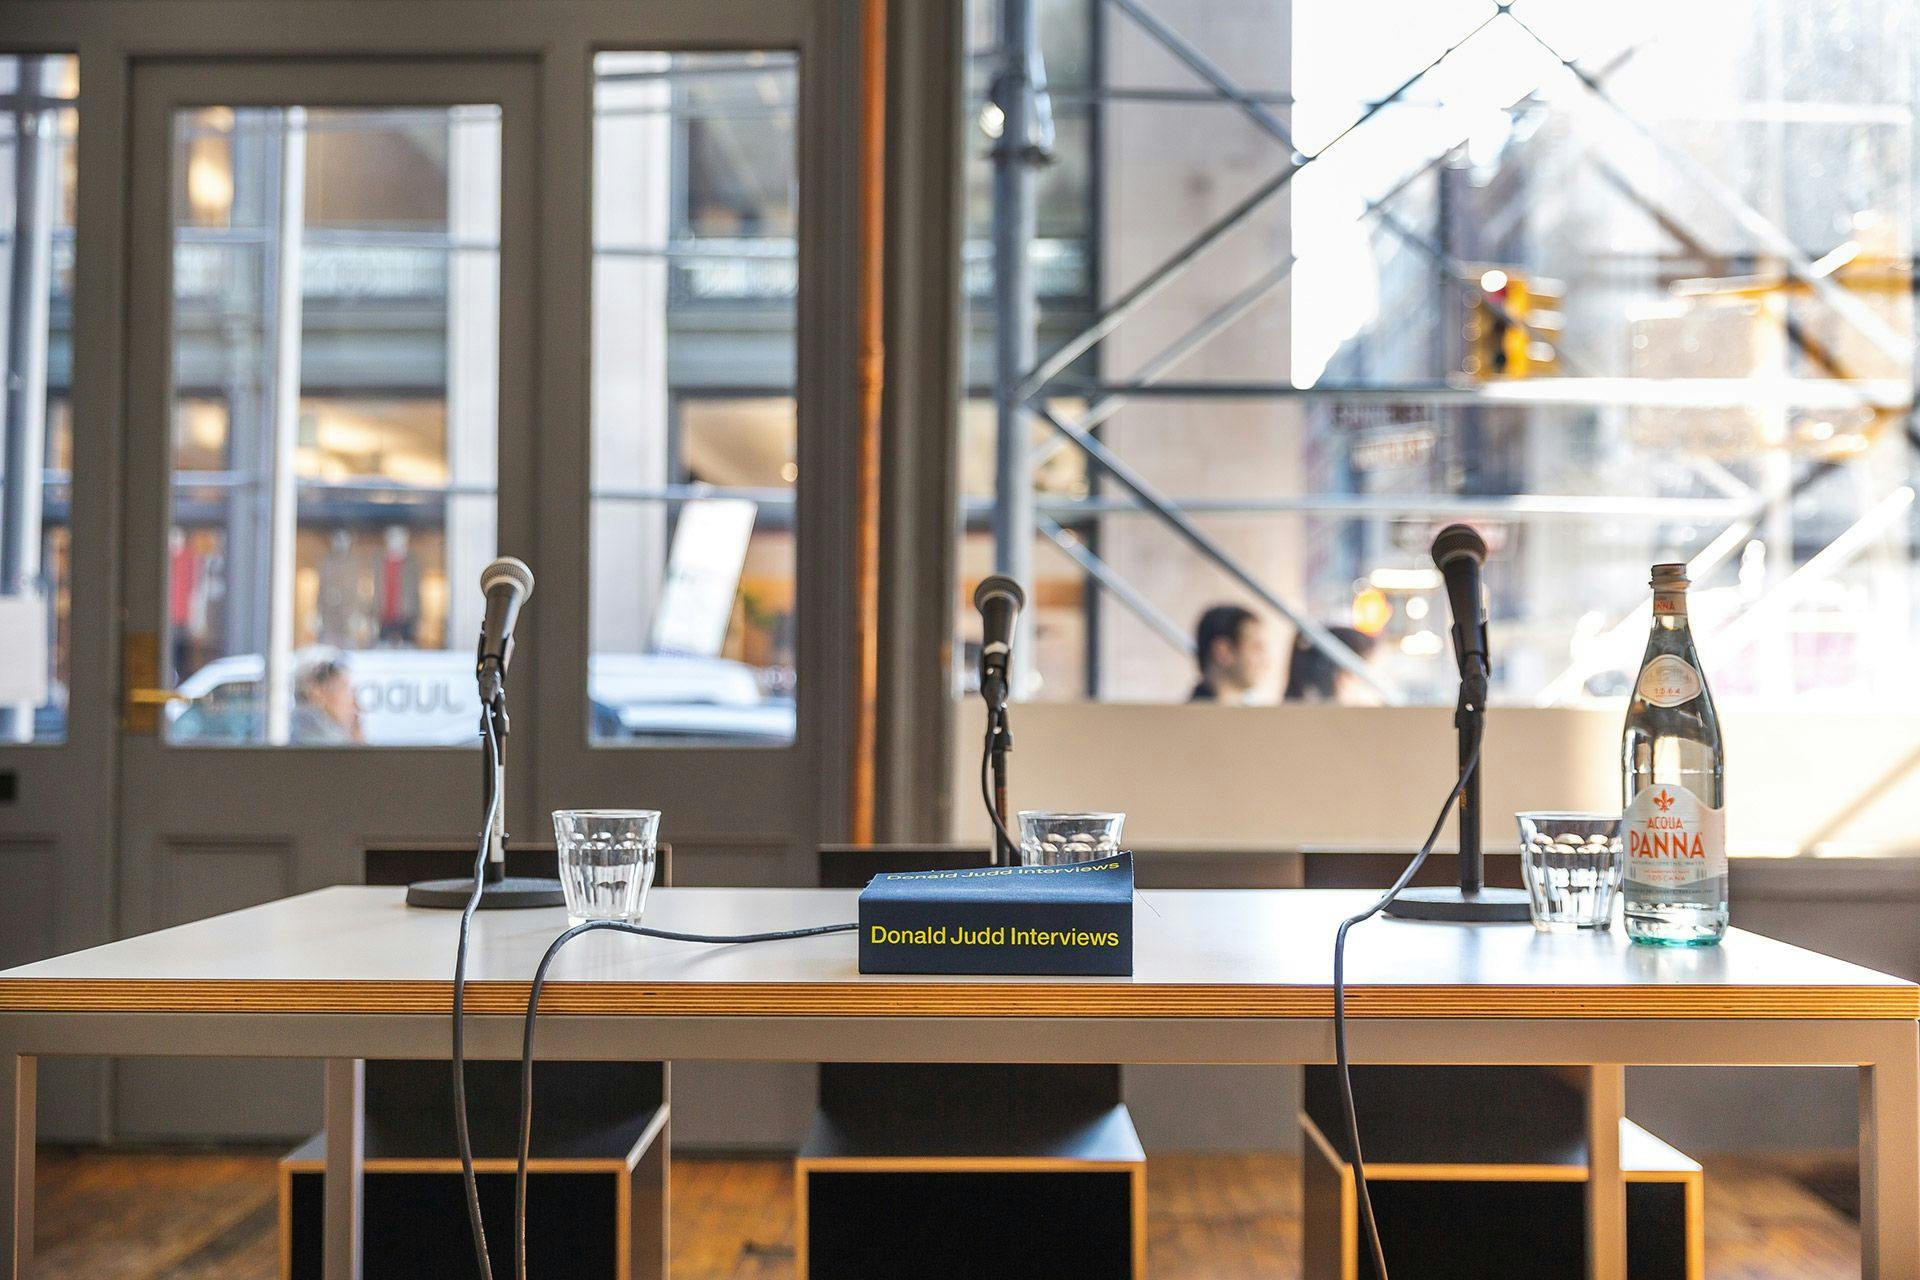 A photo of the book Donald Judd Interviews at Judd Foundation in New York, dated 2019.